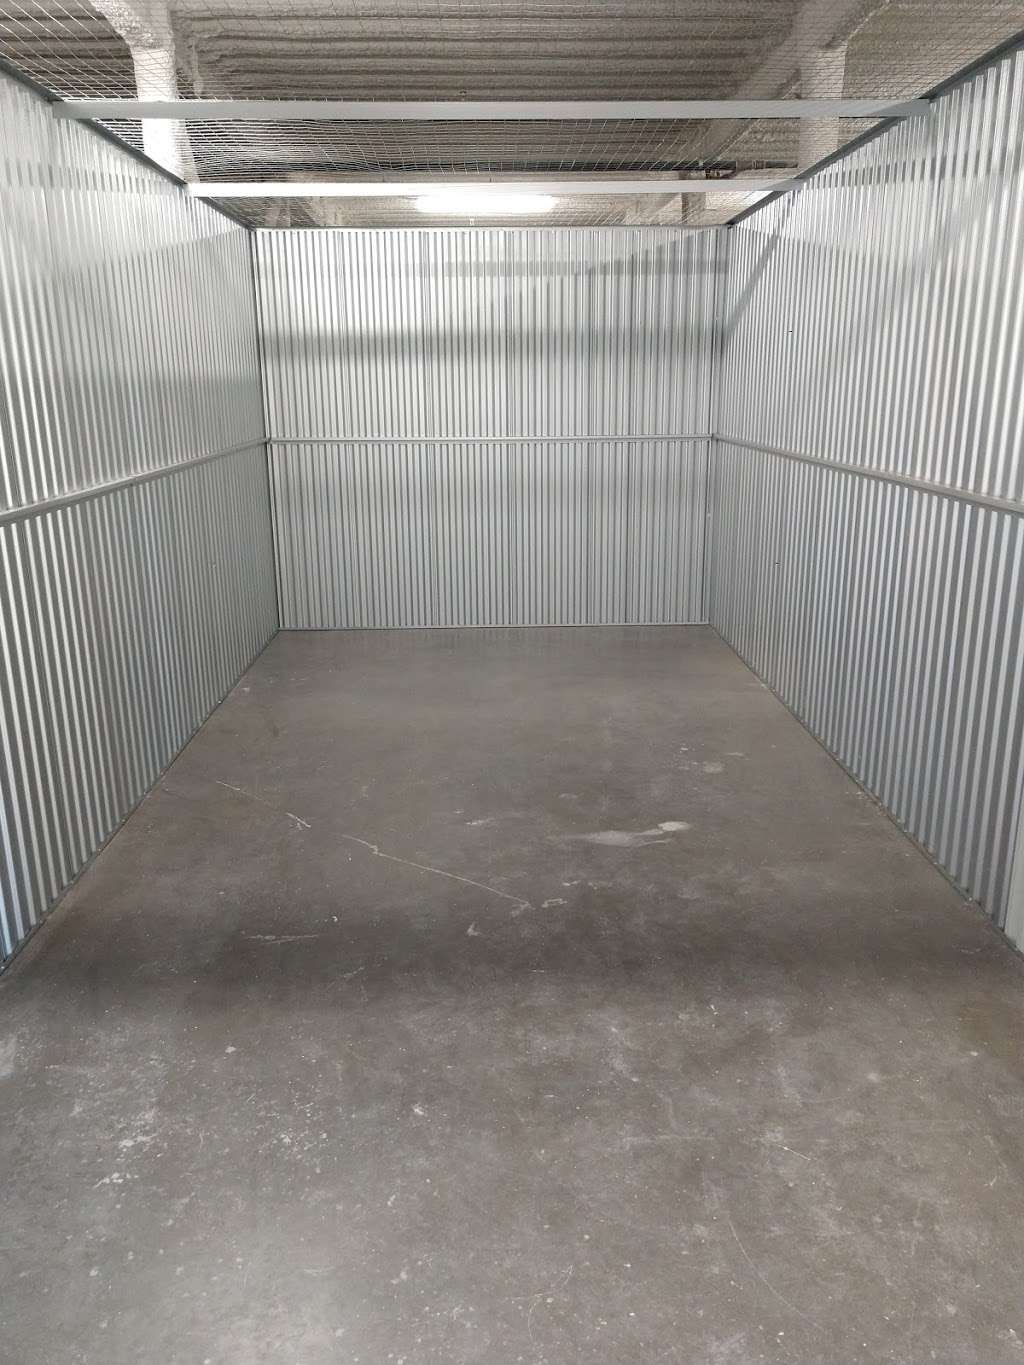 Extra Space Storage | 3914 W 111th St, Chicago, IL 60655, USA | Phone: (773) 366-8663